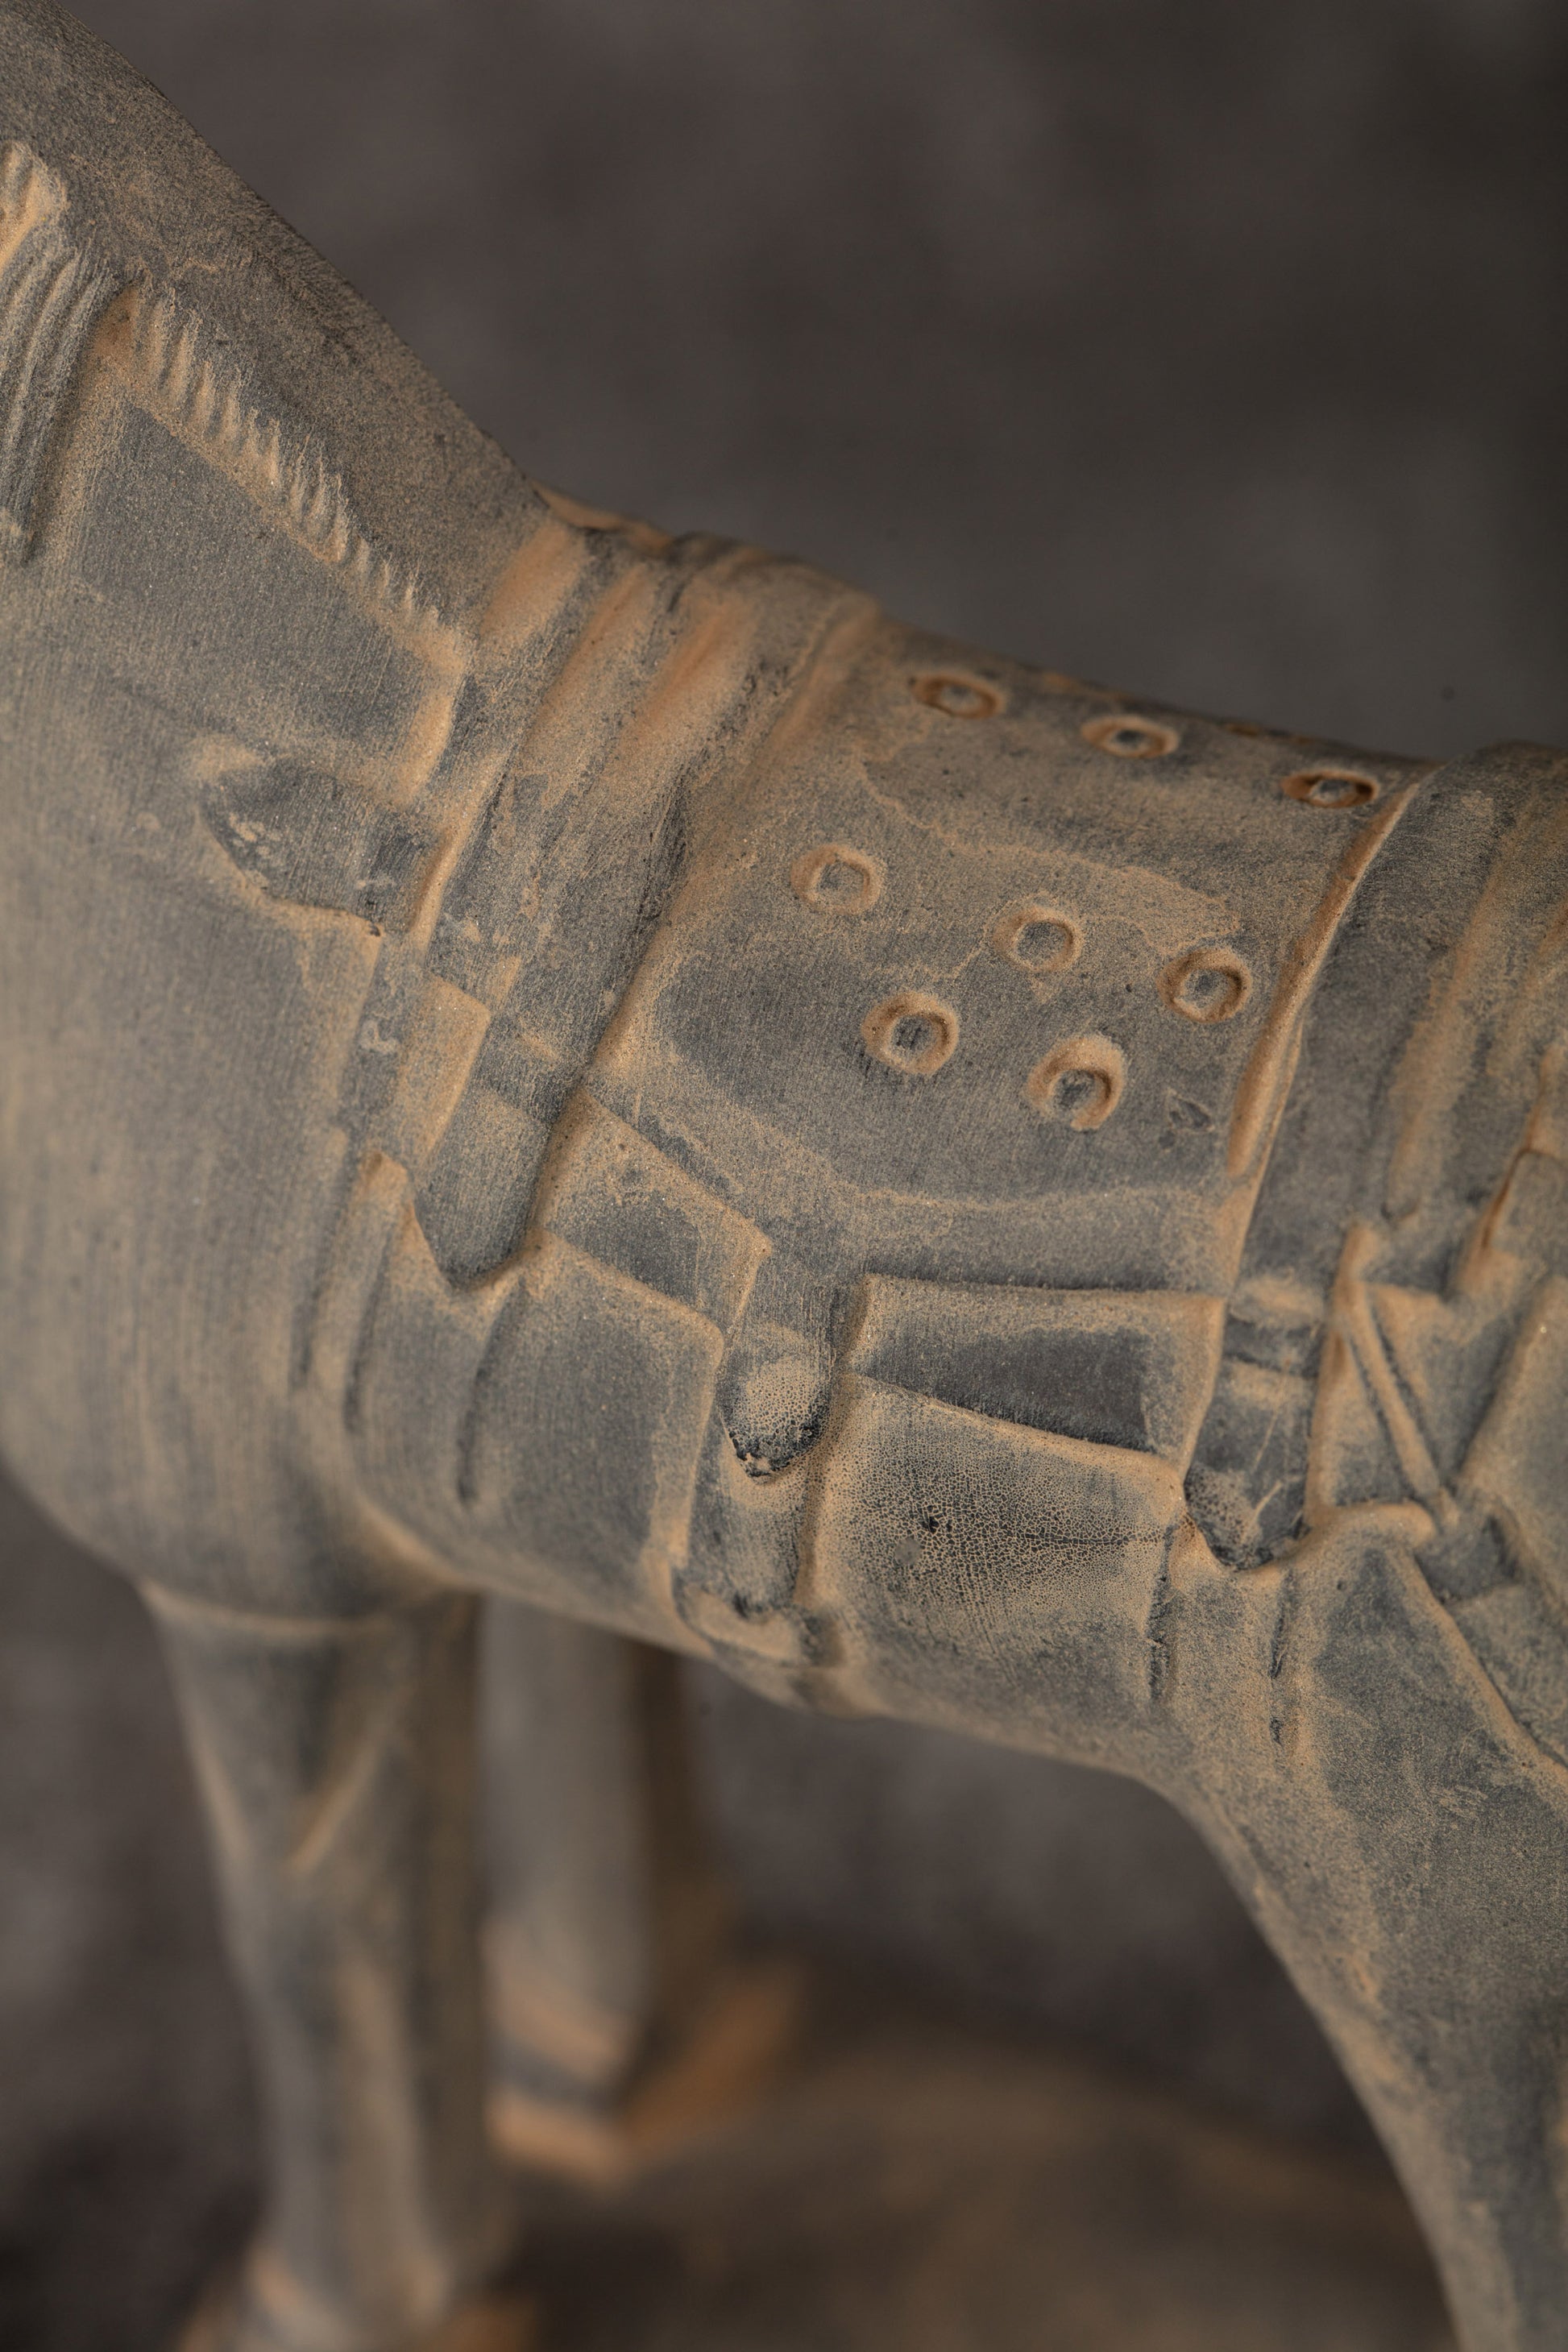 15CM Horse - CLAYARMY -Top-down perspective revealing the artistic saddle craftsmanship on our 15CM Clayarmy Terracotta Horse.